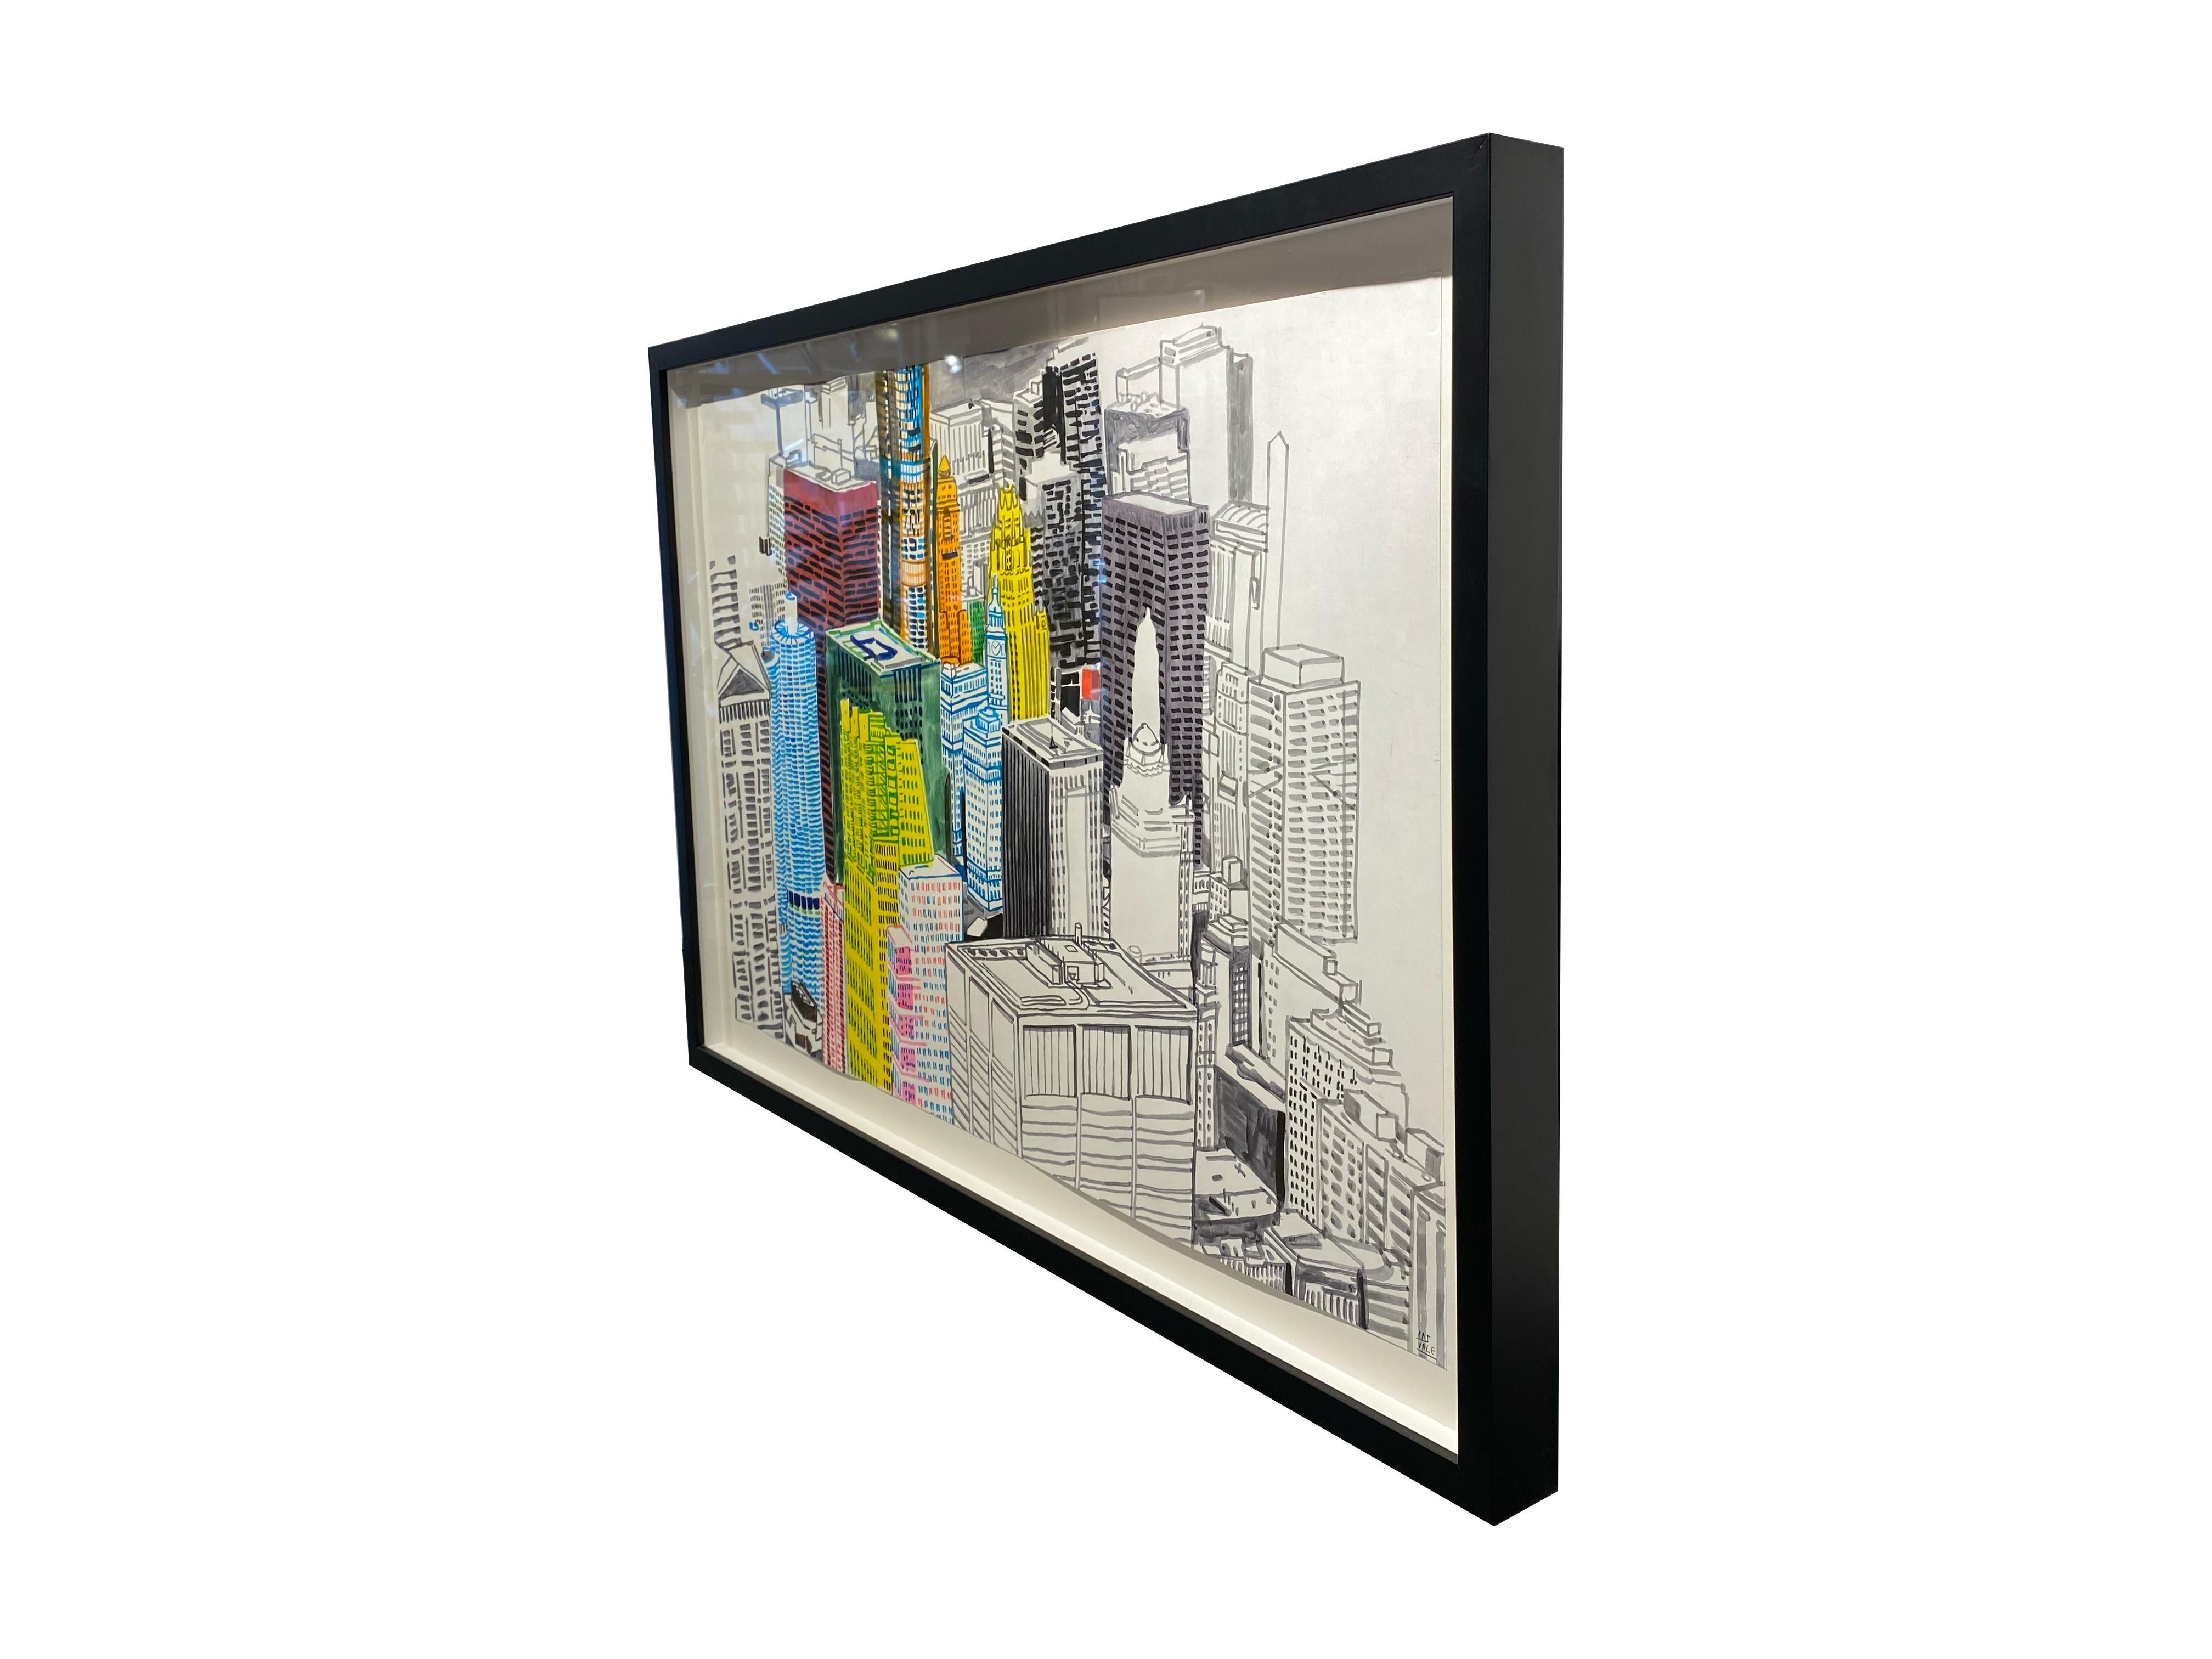 Patrick Vale
Cityscape
acrylic and ink on paper
24h x 38w in
60.96h x 96.52w cm
Framed:
28.50h x 42.50w x 2.25d in
72.39h x 107.95w x 5.71d cm
PKV020


See What I See
Why are Chicago and baseball so perfect for each other?  What is it about this